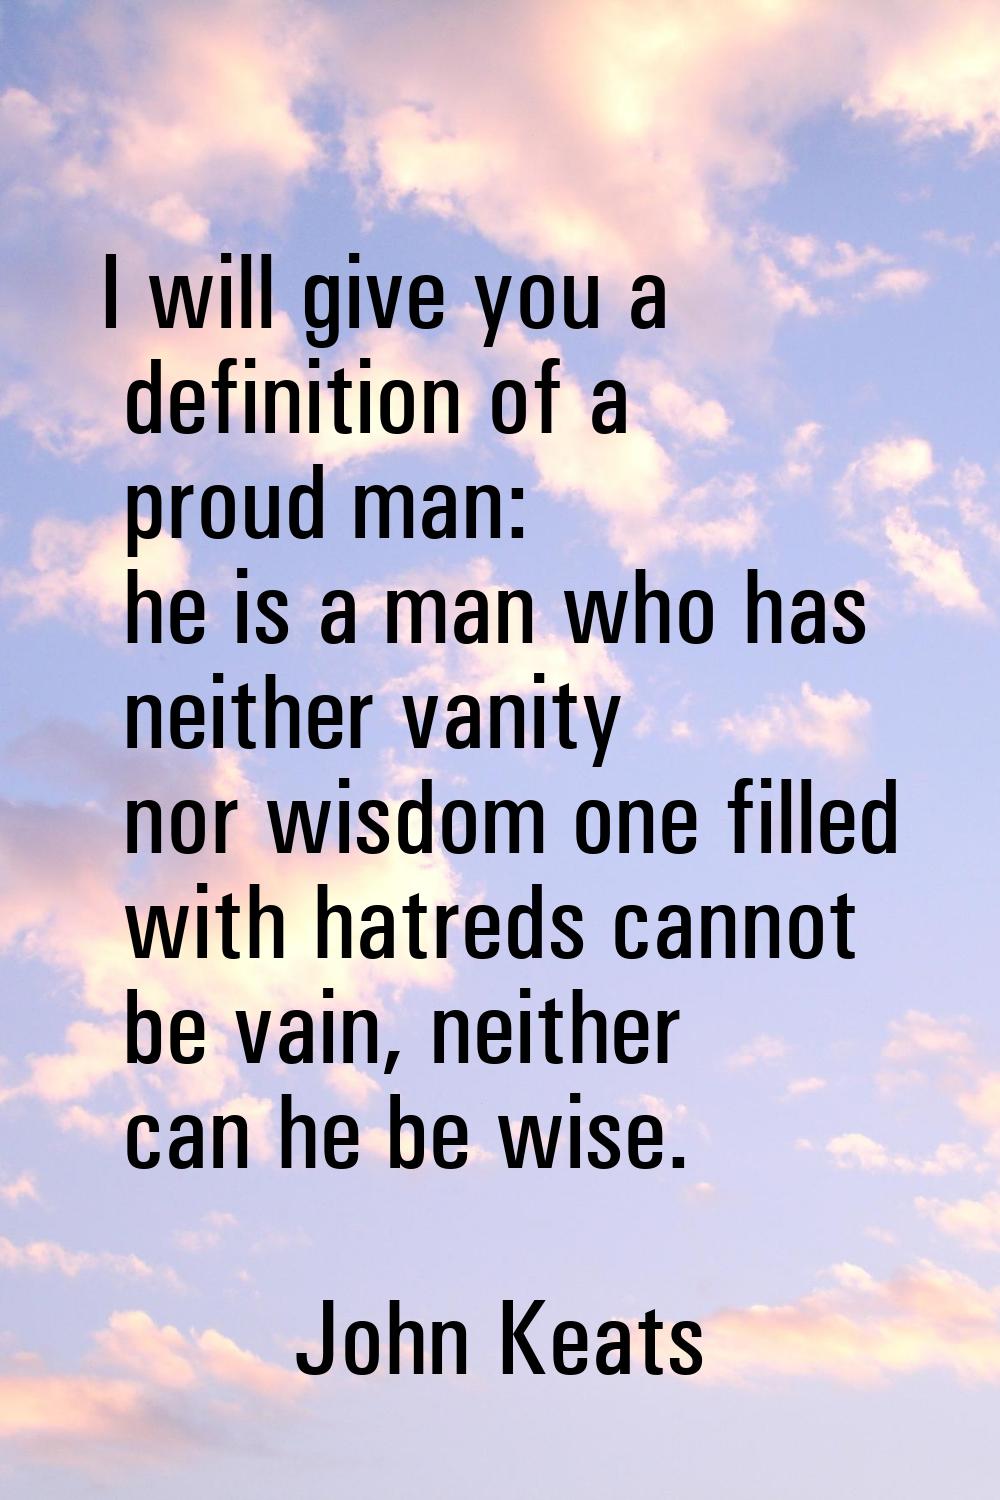 I will give you a definition of a proud man: he is a man who has neither vanity nor wisdom one fill